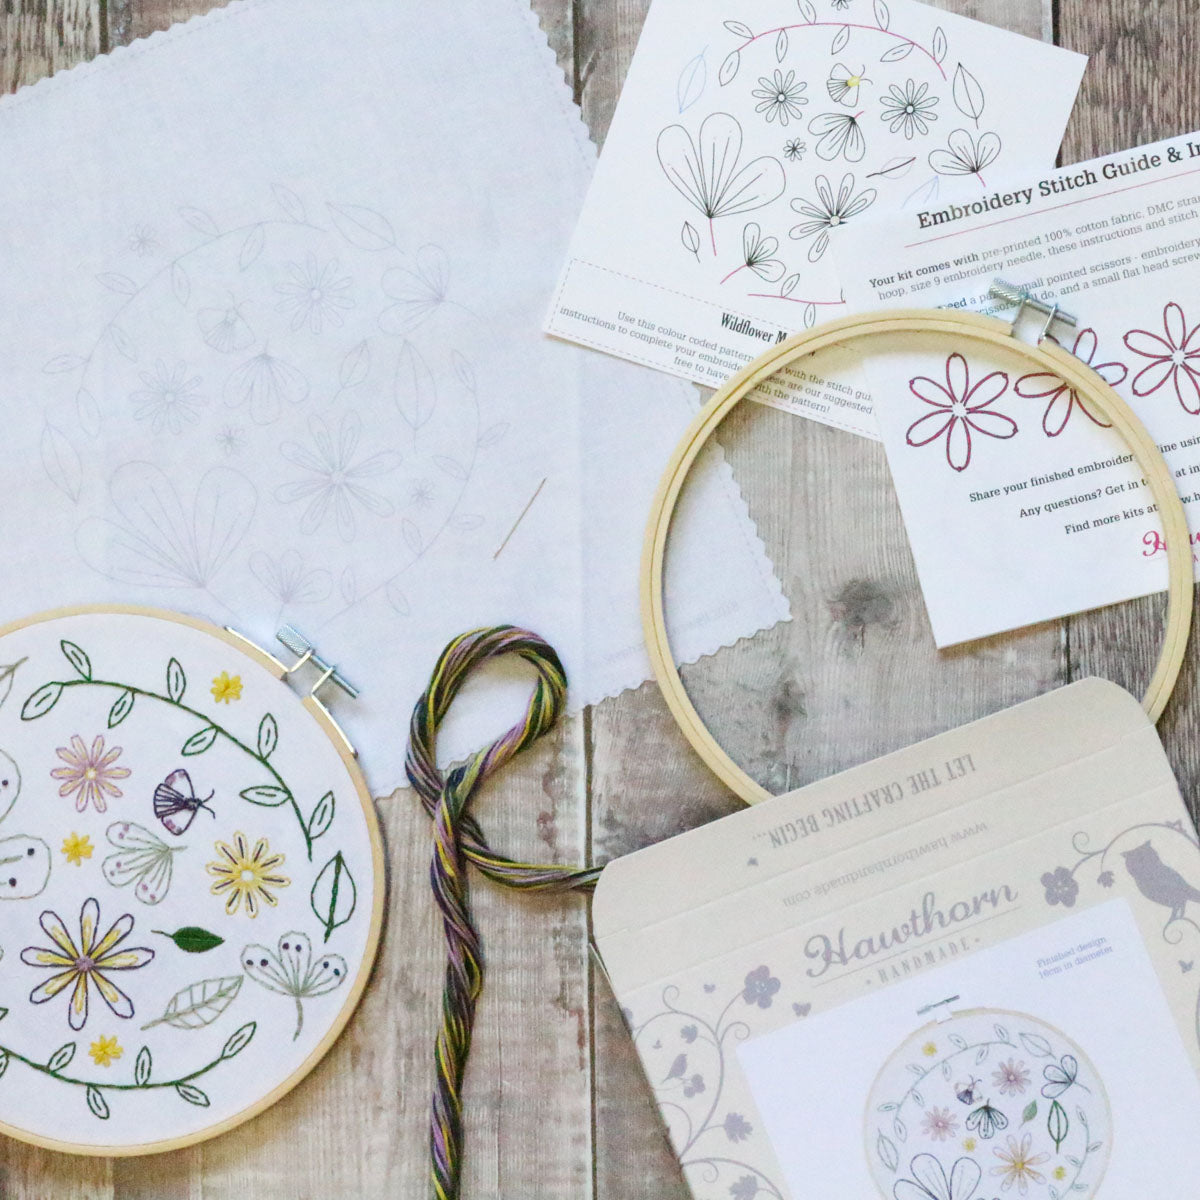 Sew Enchanting Meadow Flowers bag kit with pre-printed stitchery